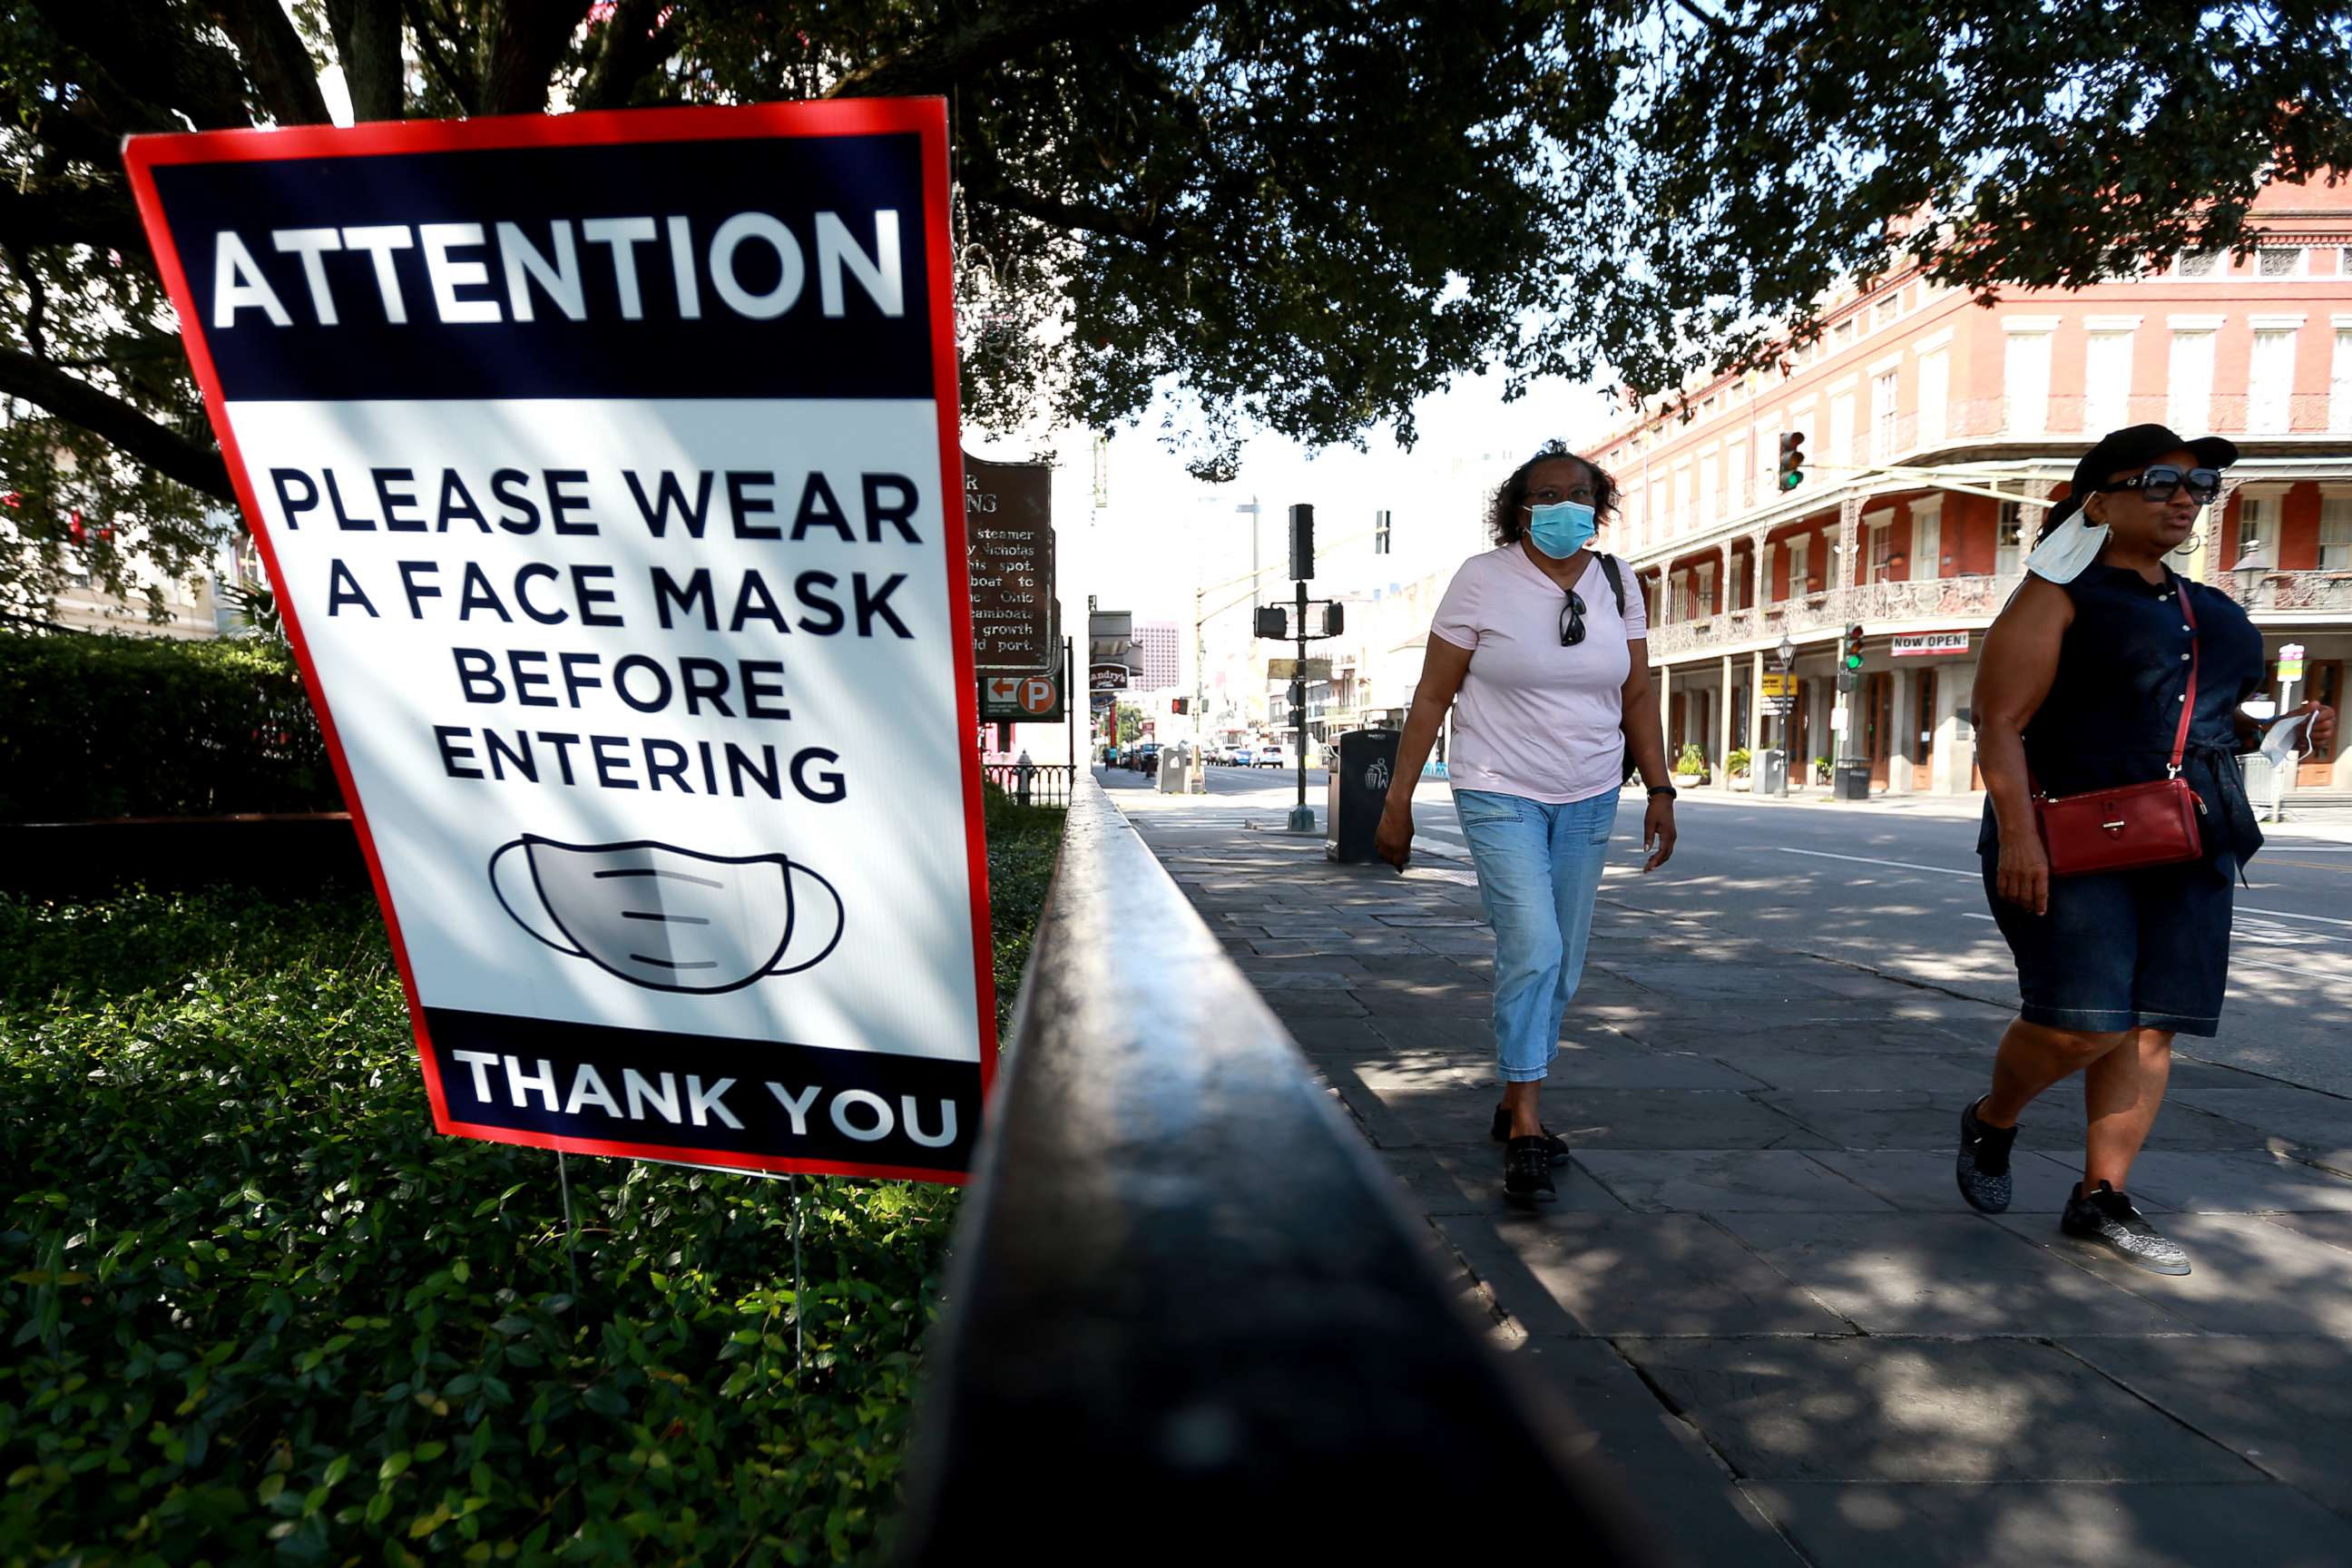 PHOTO: Visitors walk past face mask signs along Decatur Street in the French Quarter on July 14, 2020 in New Orleans, Louisiana.